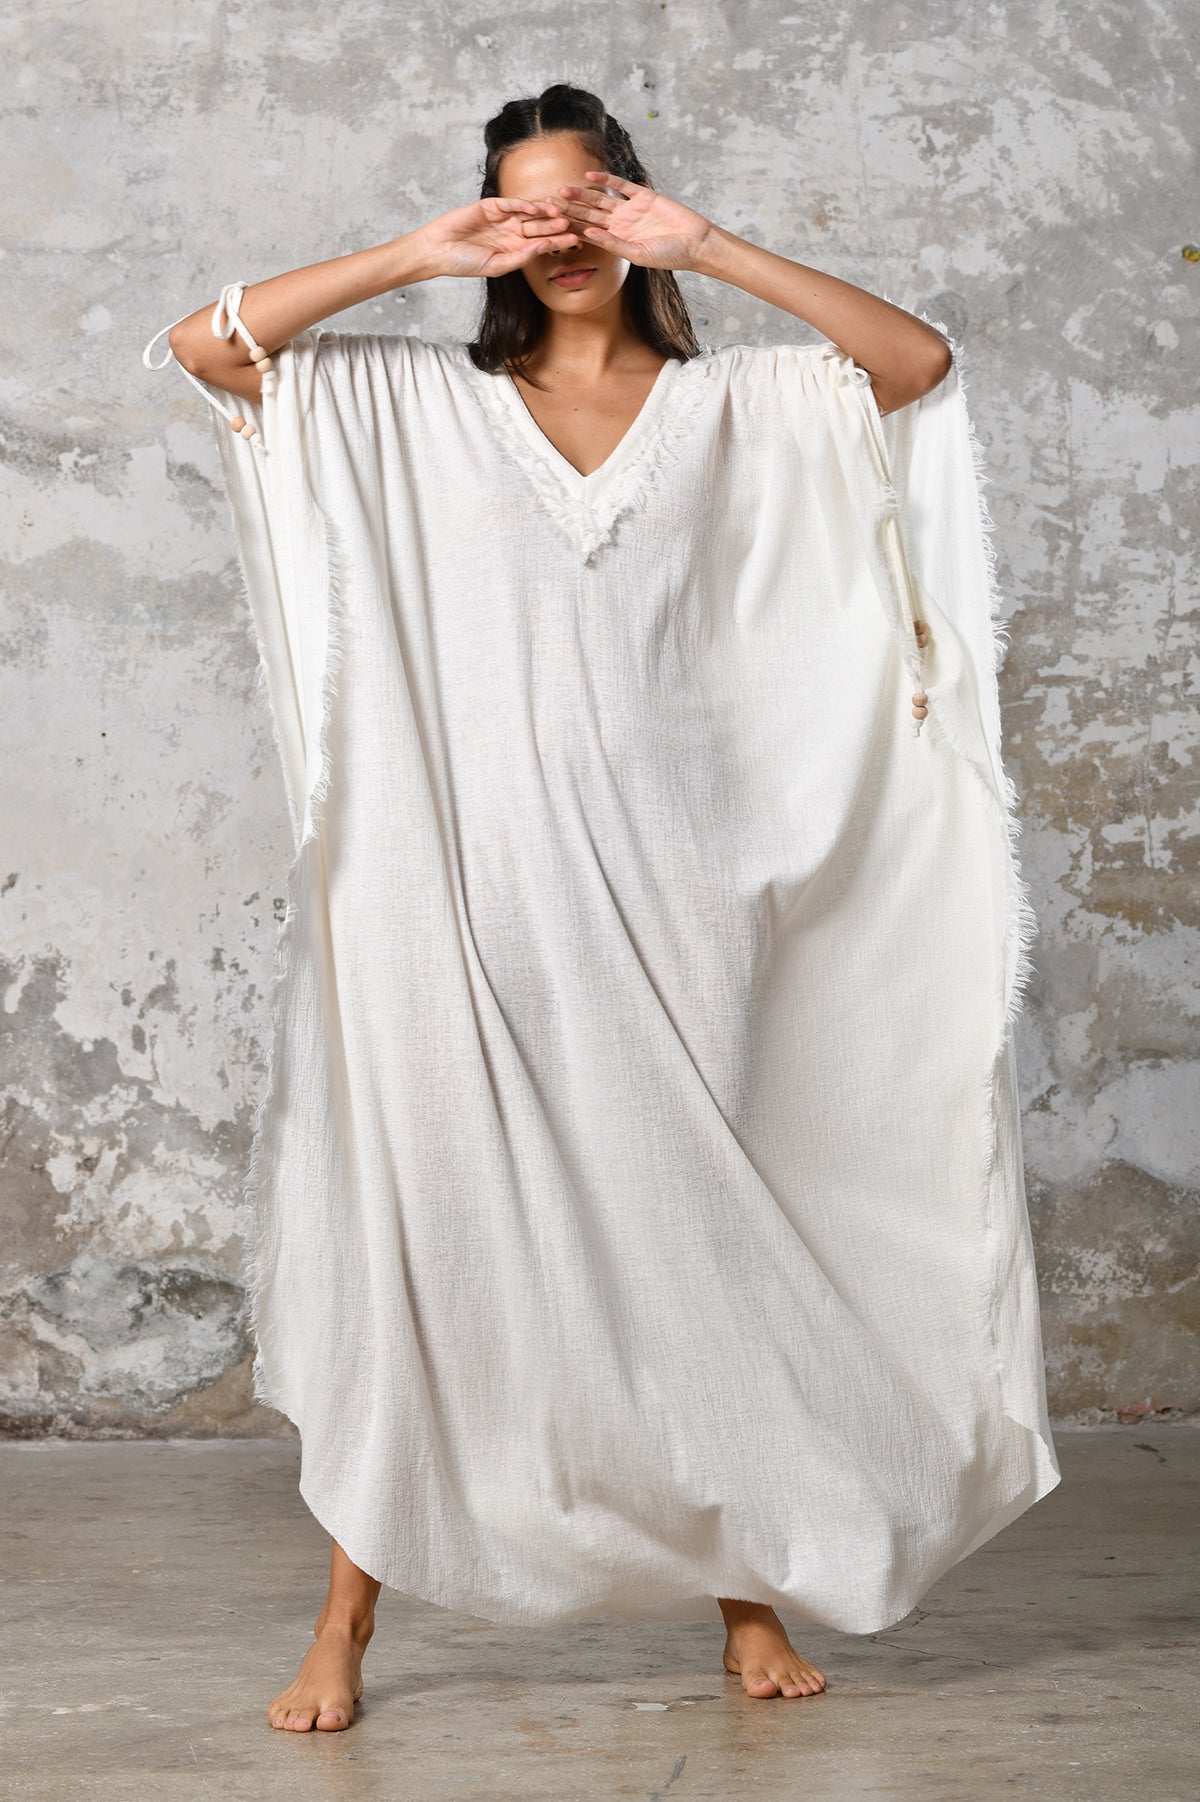 A versatile, White earthy goddess dress that embodies boho-chic style. Crafted from the softest cotton fabric, this garment offers both comfort and a fashion statement. The dress can be worn in two distinct styles, either as a kaftan or a sultry dress, with a simple change in the way you put it on. Its natural and ethereal design exudes a warm, comforting feeling against your skin, making it a must-have addition to your wardrobe for those seeking a harmonious blend of style and comfort.